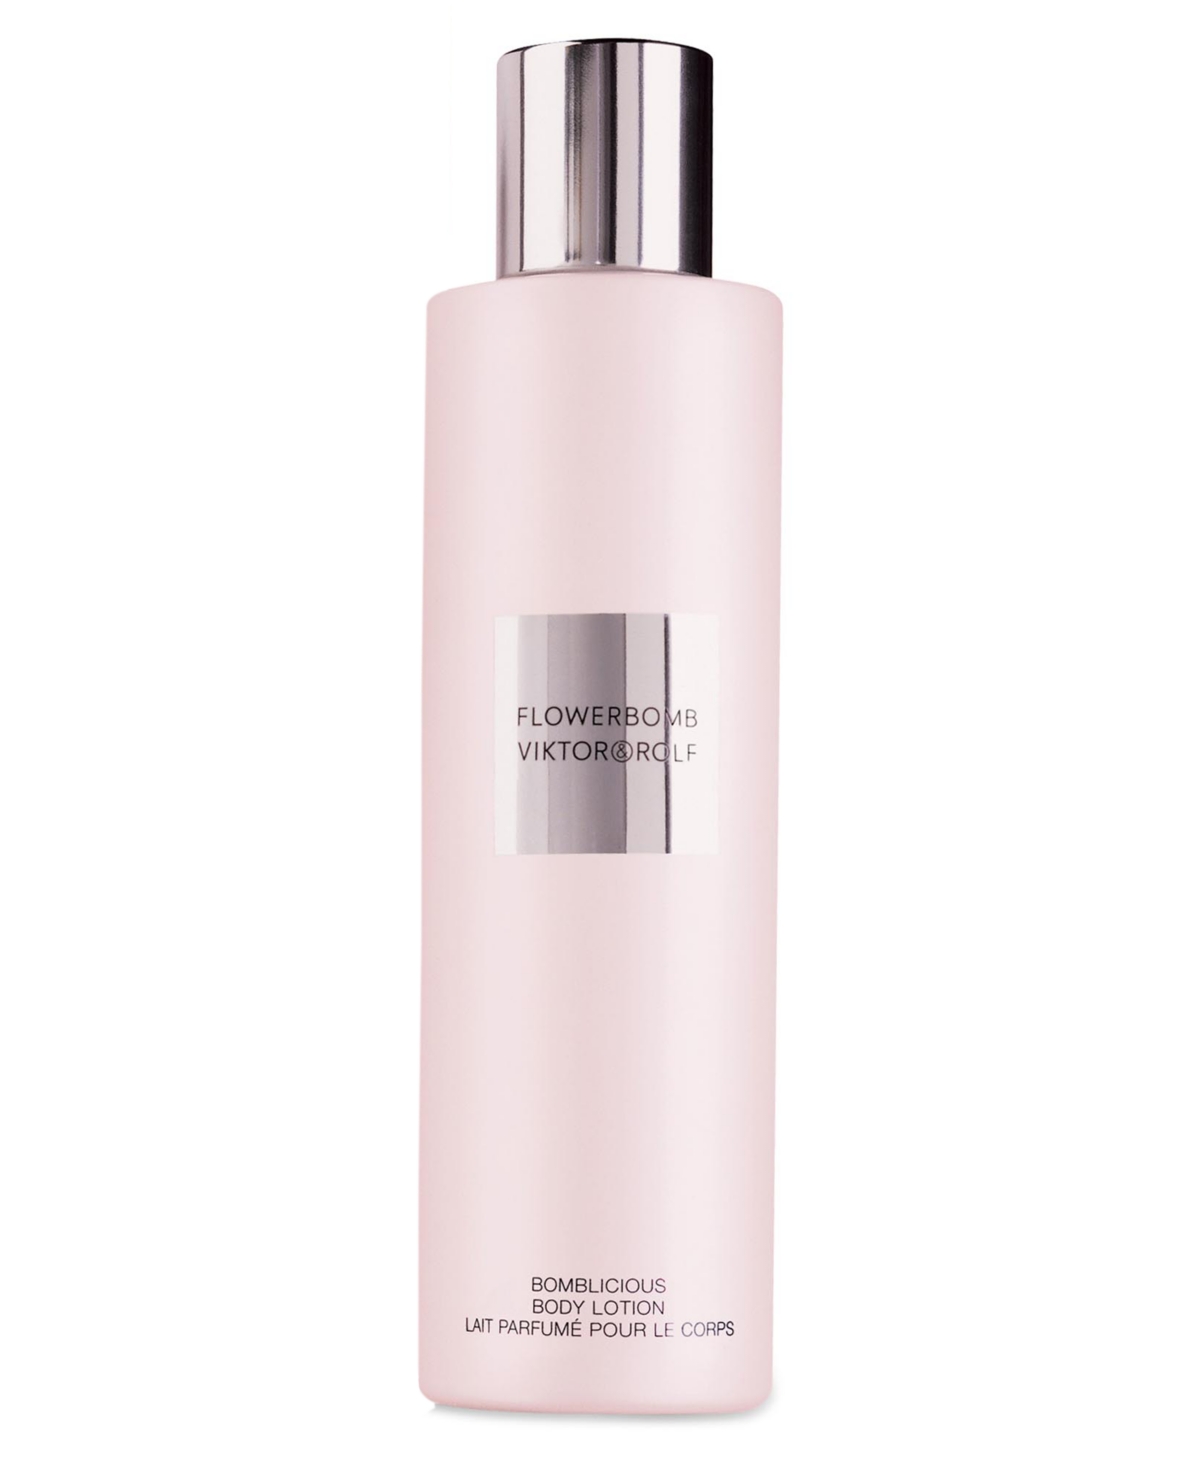 Viktor & Rolf Flowerbomb Bomblicious Body Lotion, 6.7 Oz. In No Color